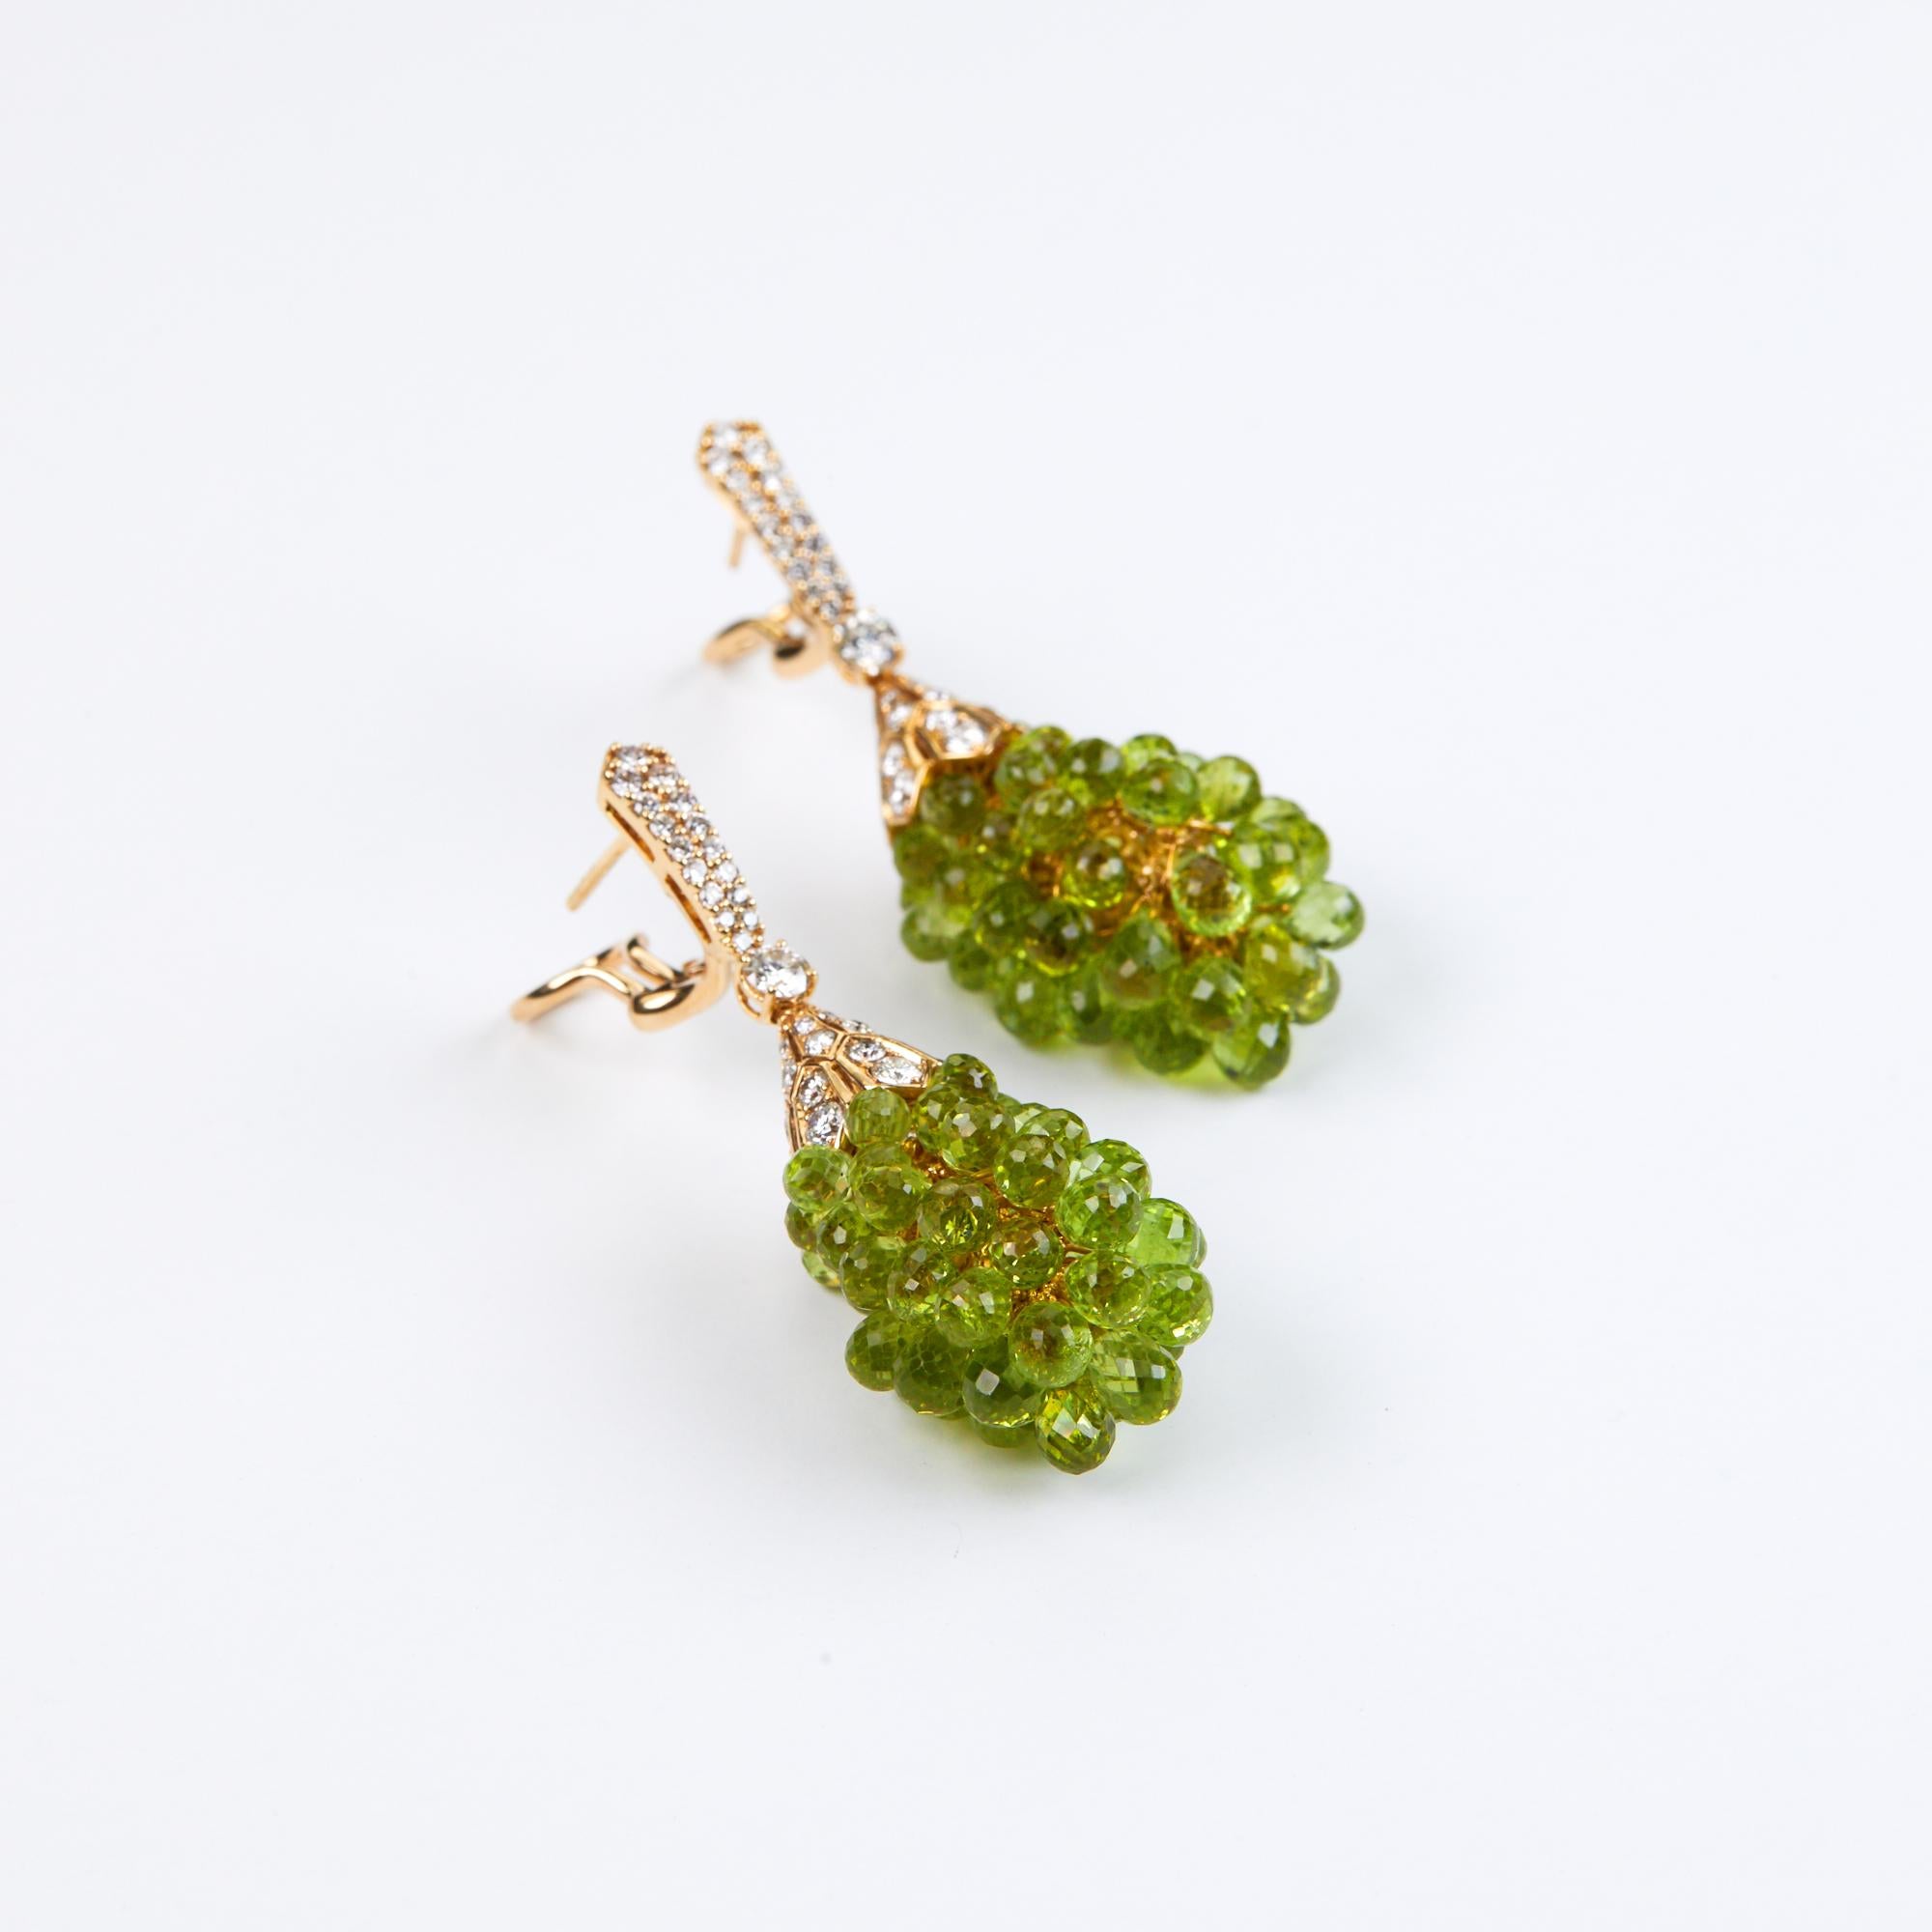 Diamond and Peridot Chandlier Earrings with 56.05 carats of Briolette cut Peridots.  Peridot is one of the oldest known gemstones with mining records dating back to 1500 BC.  The Briolette cut is an elongated pear shape cut with triangular and